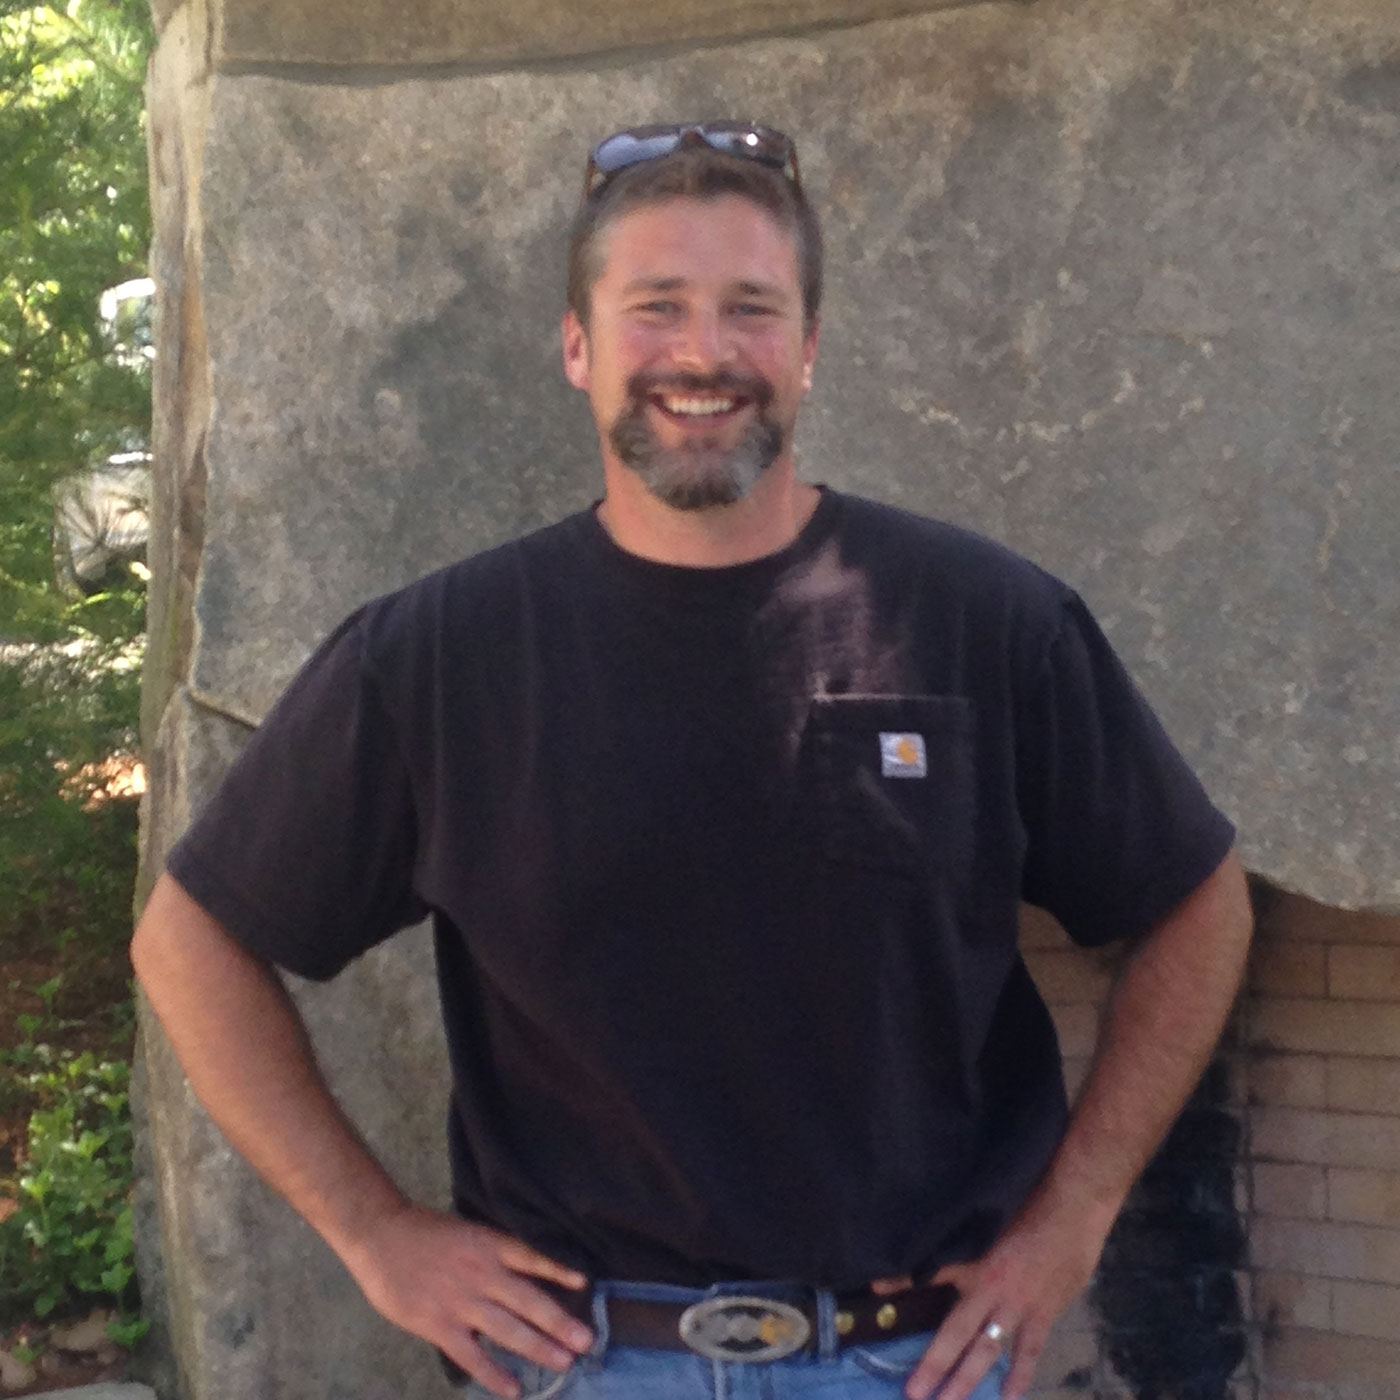 Derek Chapman is a Project Manager for Knickerbocker Group in Maine